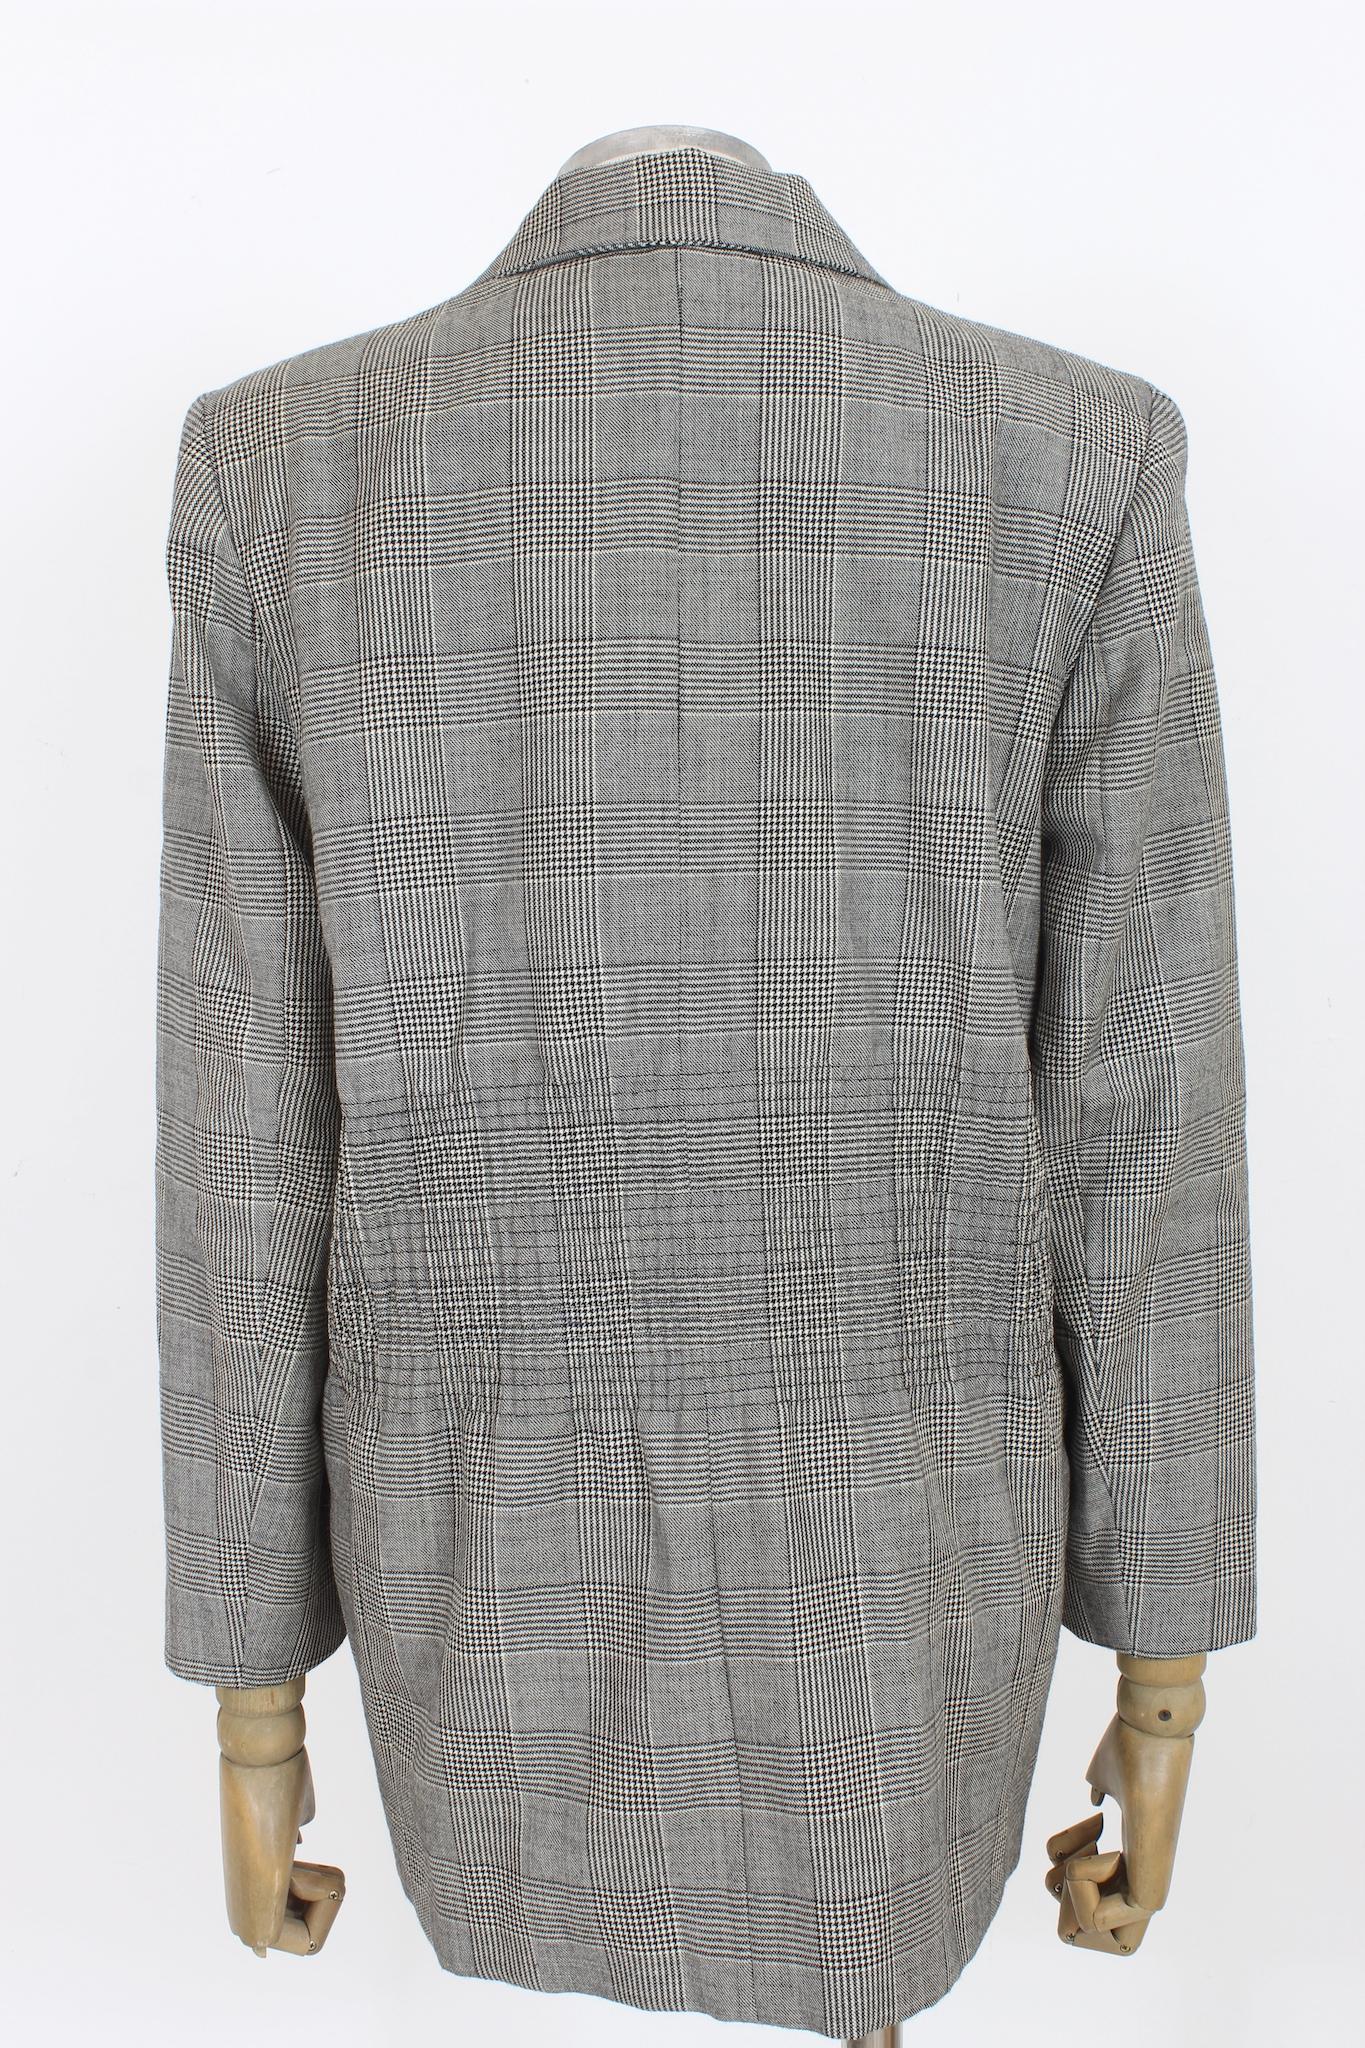 This classic Moschino black and white wool check jacket is an iconic vintage piece from 1980s. Featuring an elasticated waistband for perfect fit, this timeless piece will add a touch of elegance to any look.

Size: 42 It 8 Us 10 Uk

Shoulder: 44